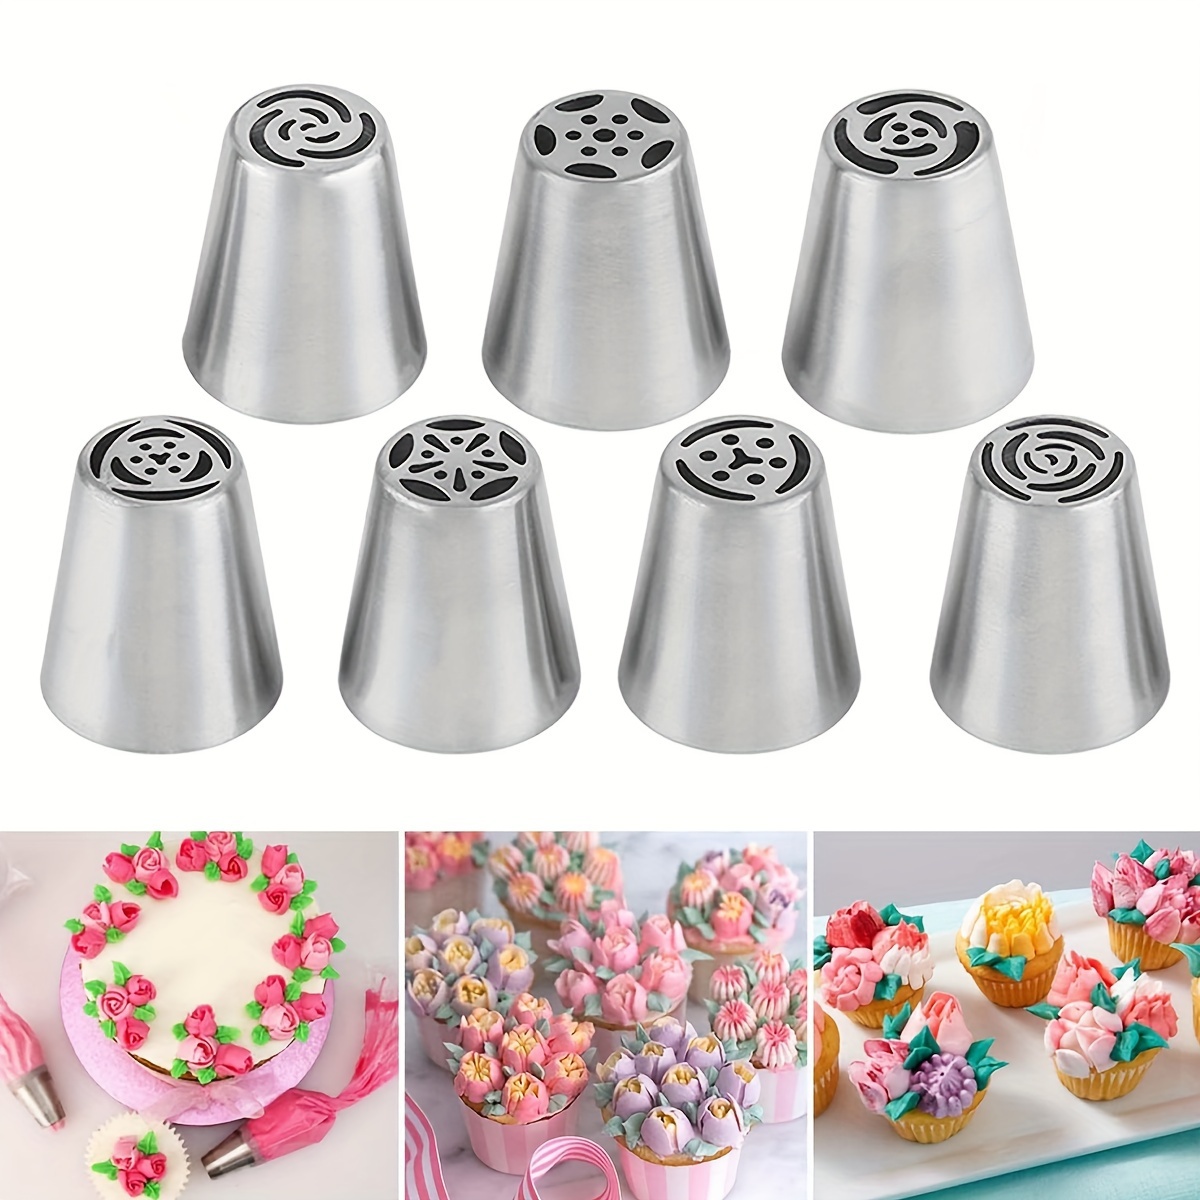 47 Pcs Russian Piping Tips Set, 12 Flower Frosting Nozzles Icing Tips for  Cake Decorating Tips Kit, Baking Supplies for Cookie Cupcake, 2 Leaf Piping